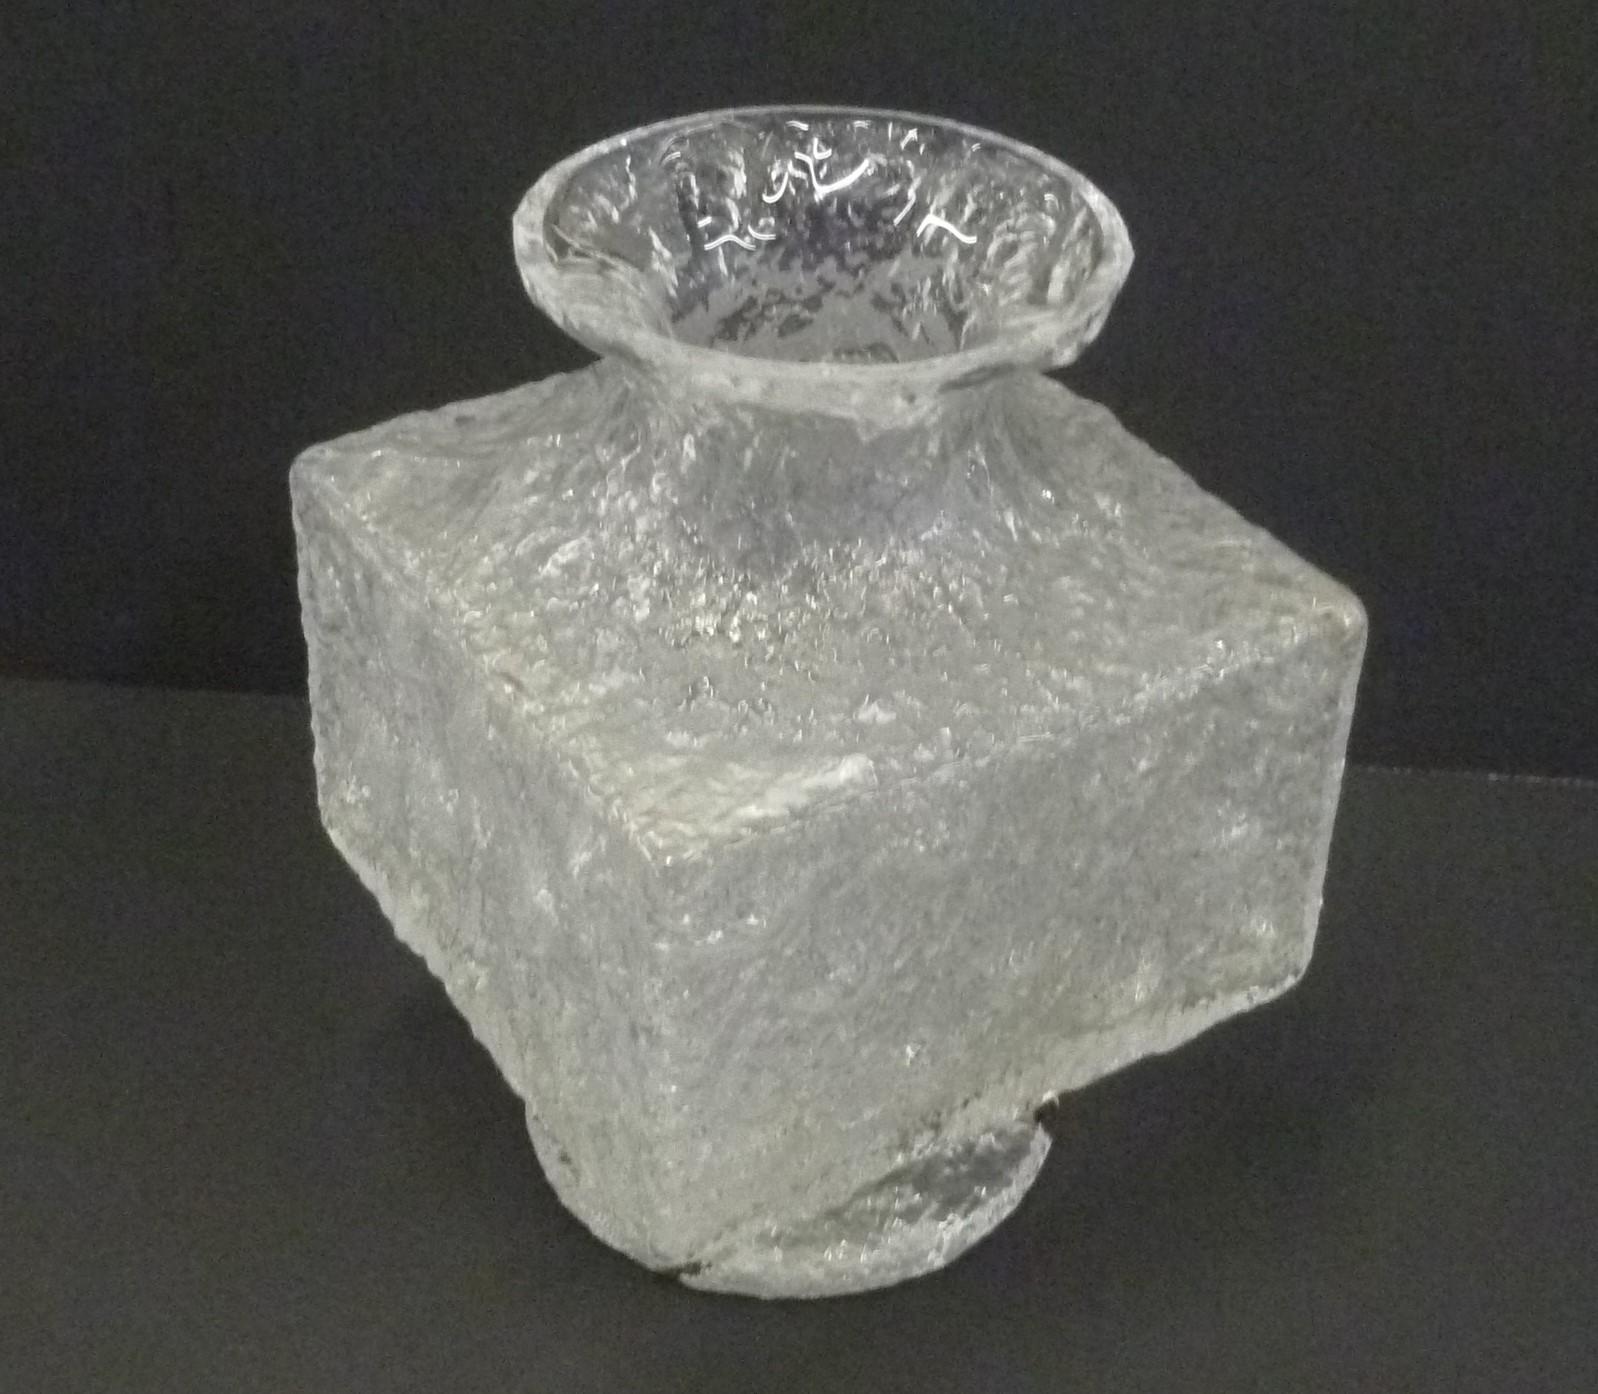 REDUCED FROM $425....From Timo Sarpaneva (Finland 1926-2006) a Mid-Century Modern large Brutalist Crassus vase by Iittala, Finland, 1960s. The collection consisted of mold poured lead- glass vases in different sizes and shapes with rough exterior.